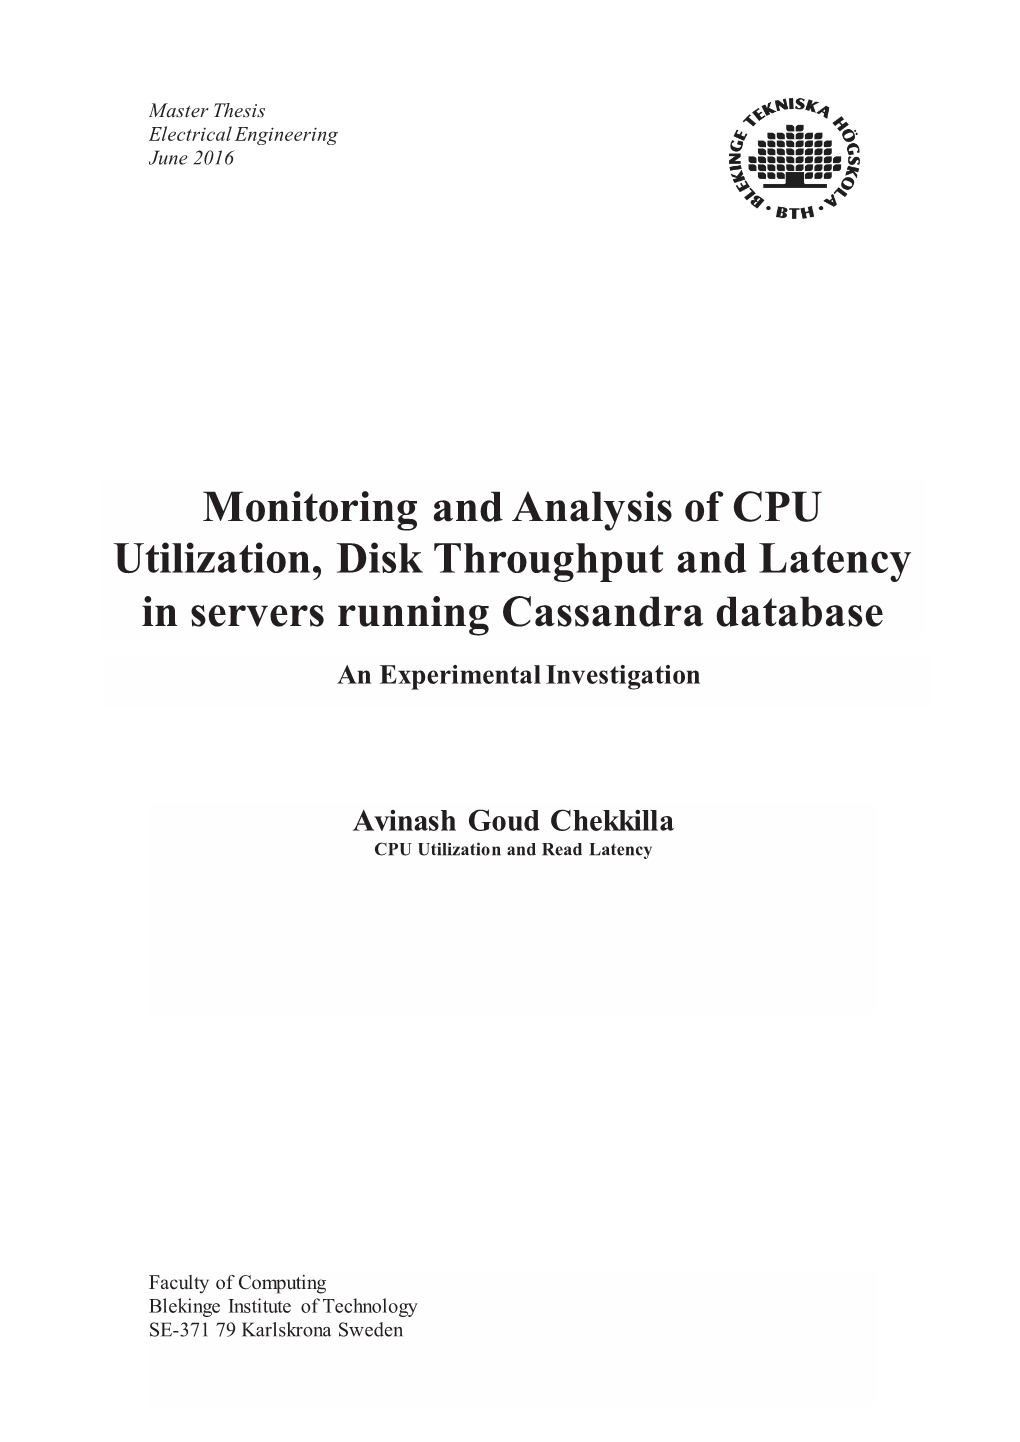 Monitoring and Analysis of CPU Utilization, Disk Throughput and Latency in Servers Running Cassandra Database an Experimental Investigation